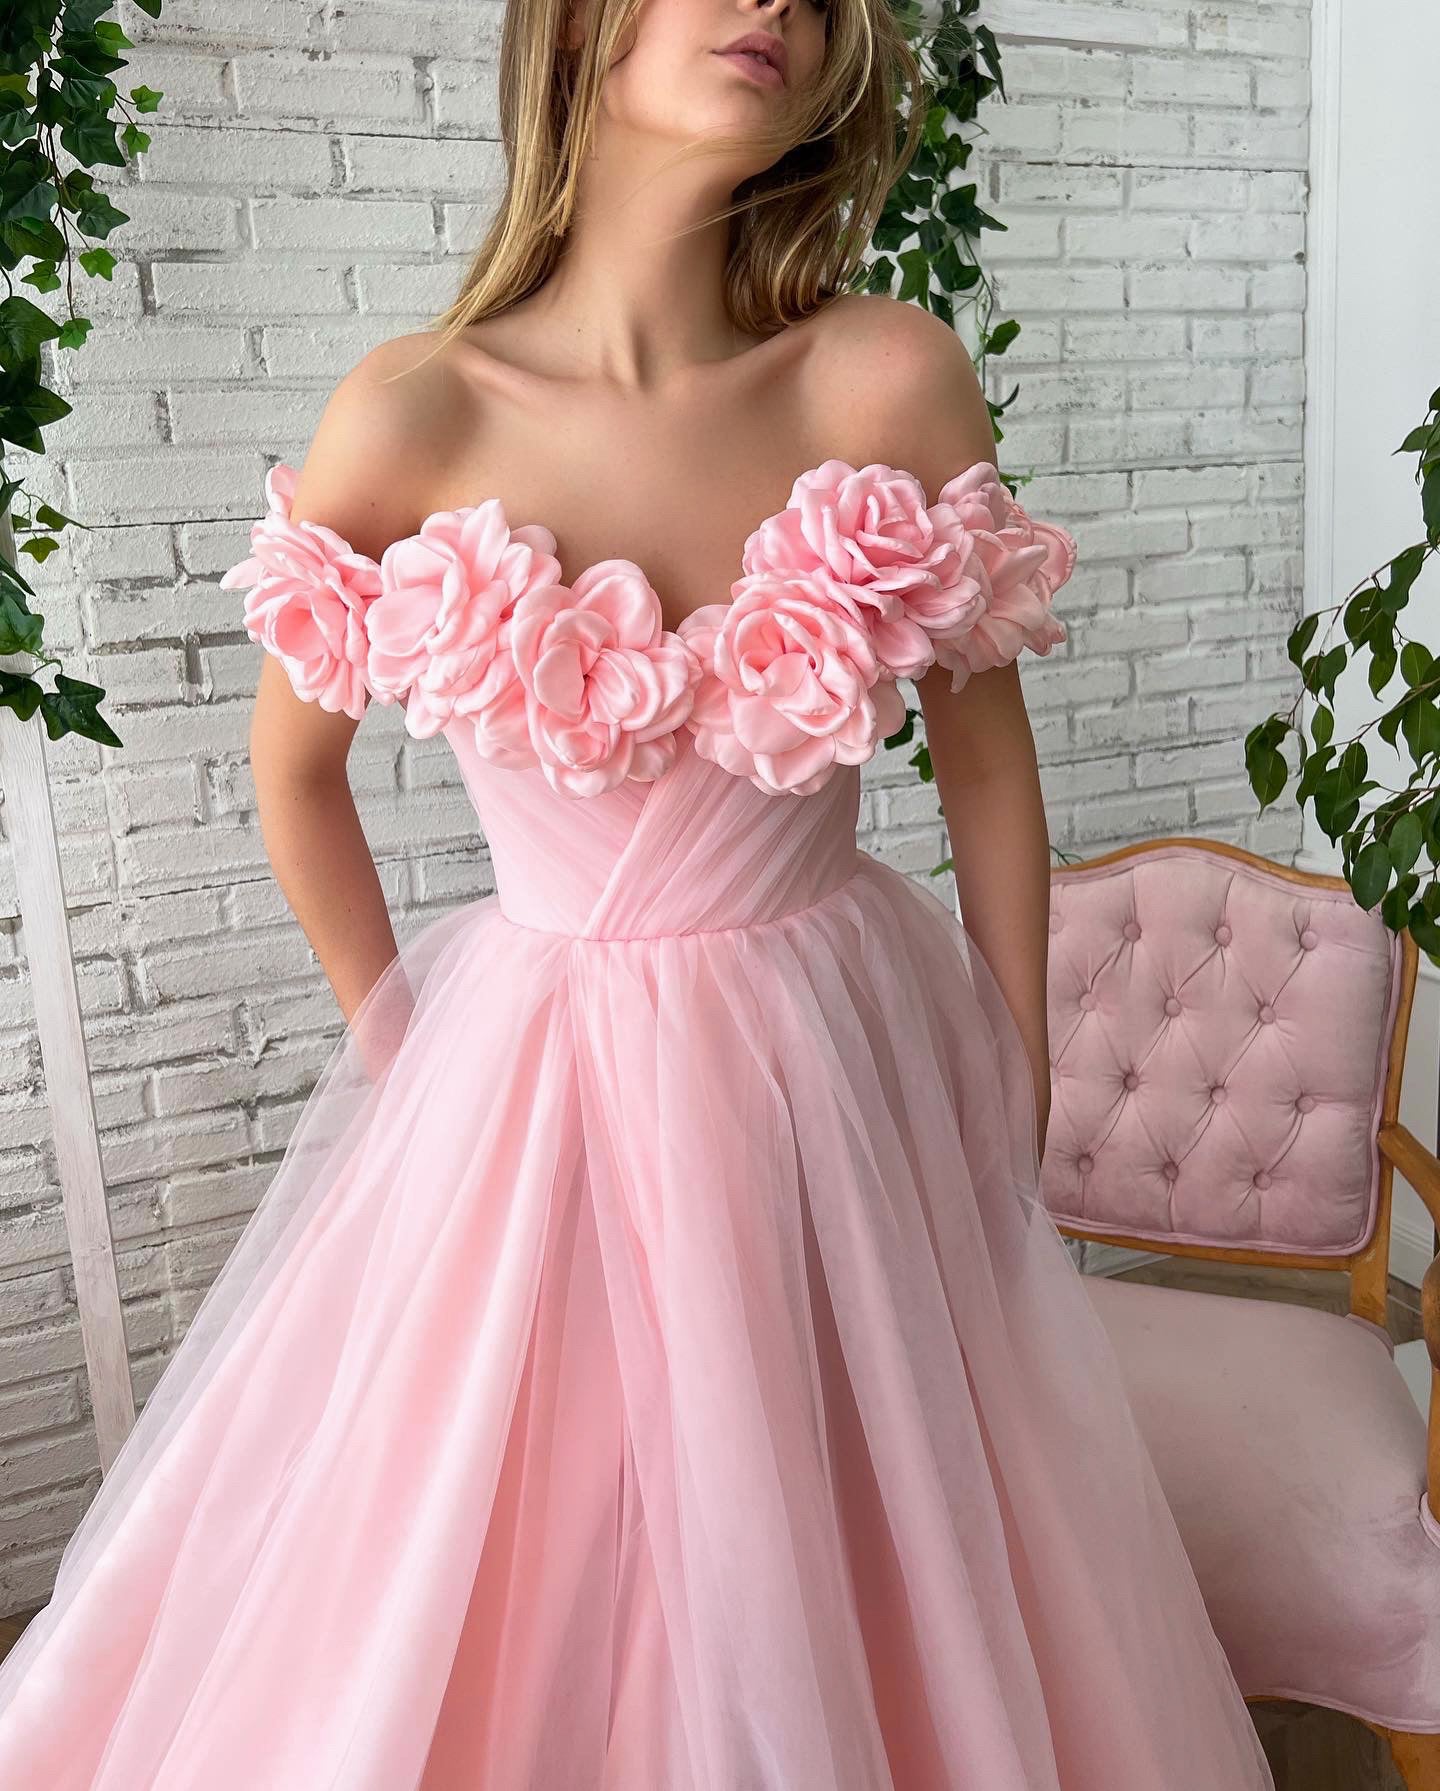 Pink A-Line dress with off the shoulder sleeves, embroidery and flowers